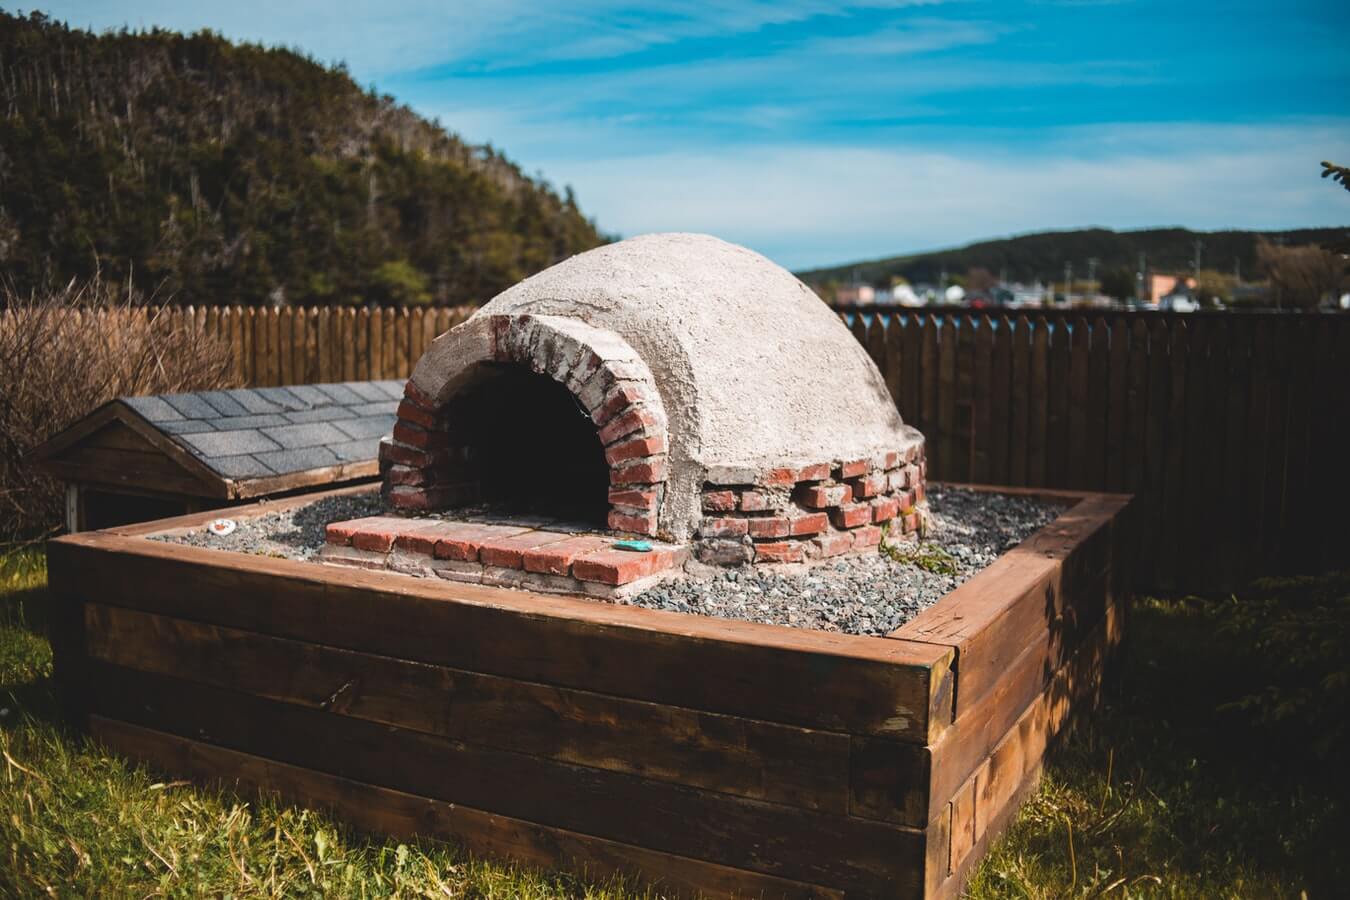 Diy Outdoor Pizza Oven How To Build, Homemade Outdoor Pizza Oven Plans